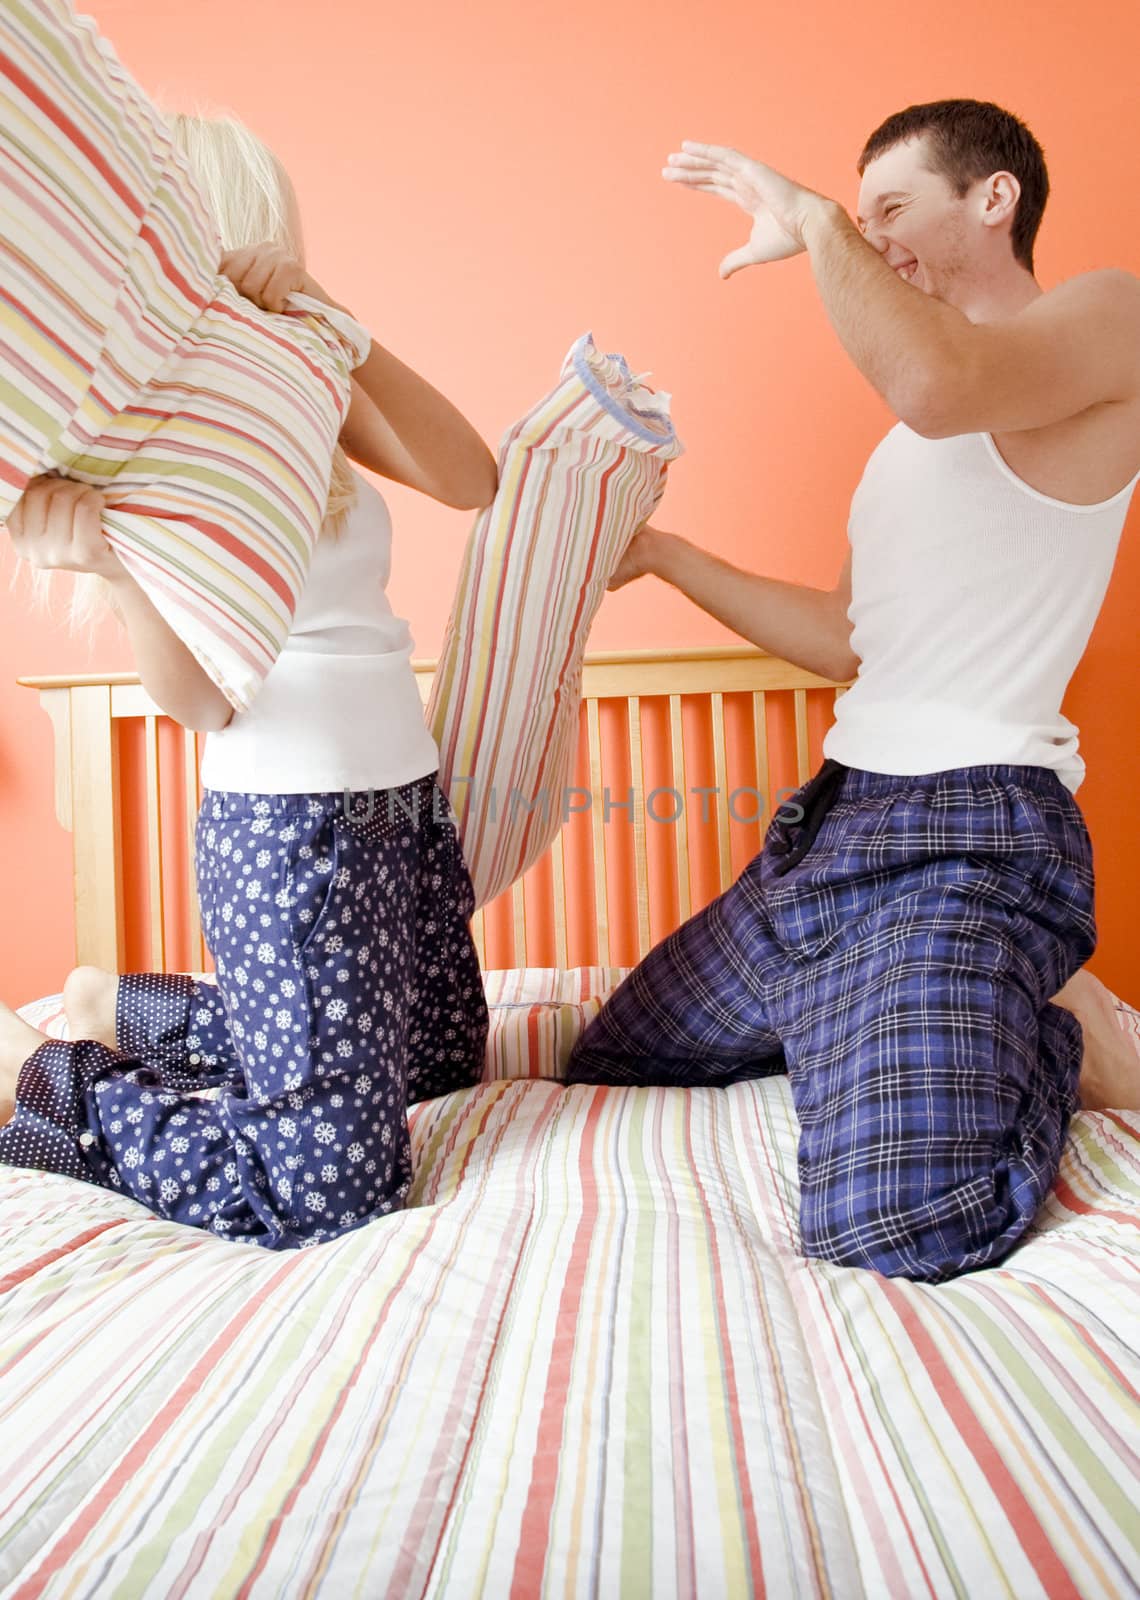 Young Couple Kneeling on Bed Having a Pillow Fight by cardmaverick